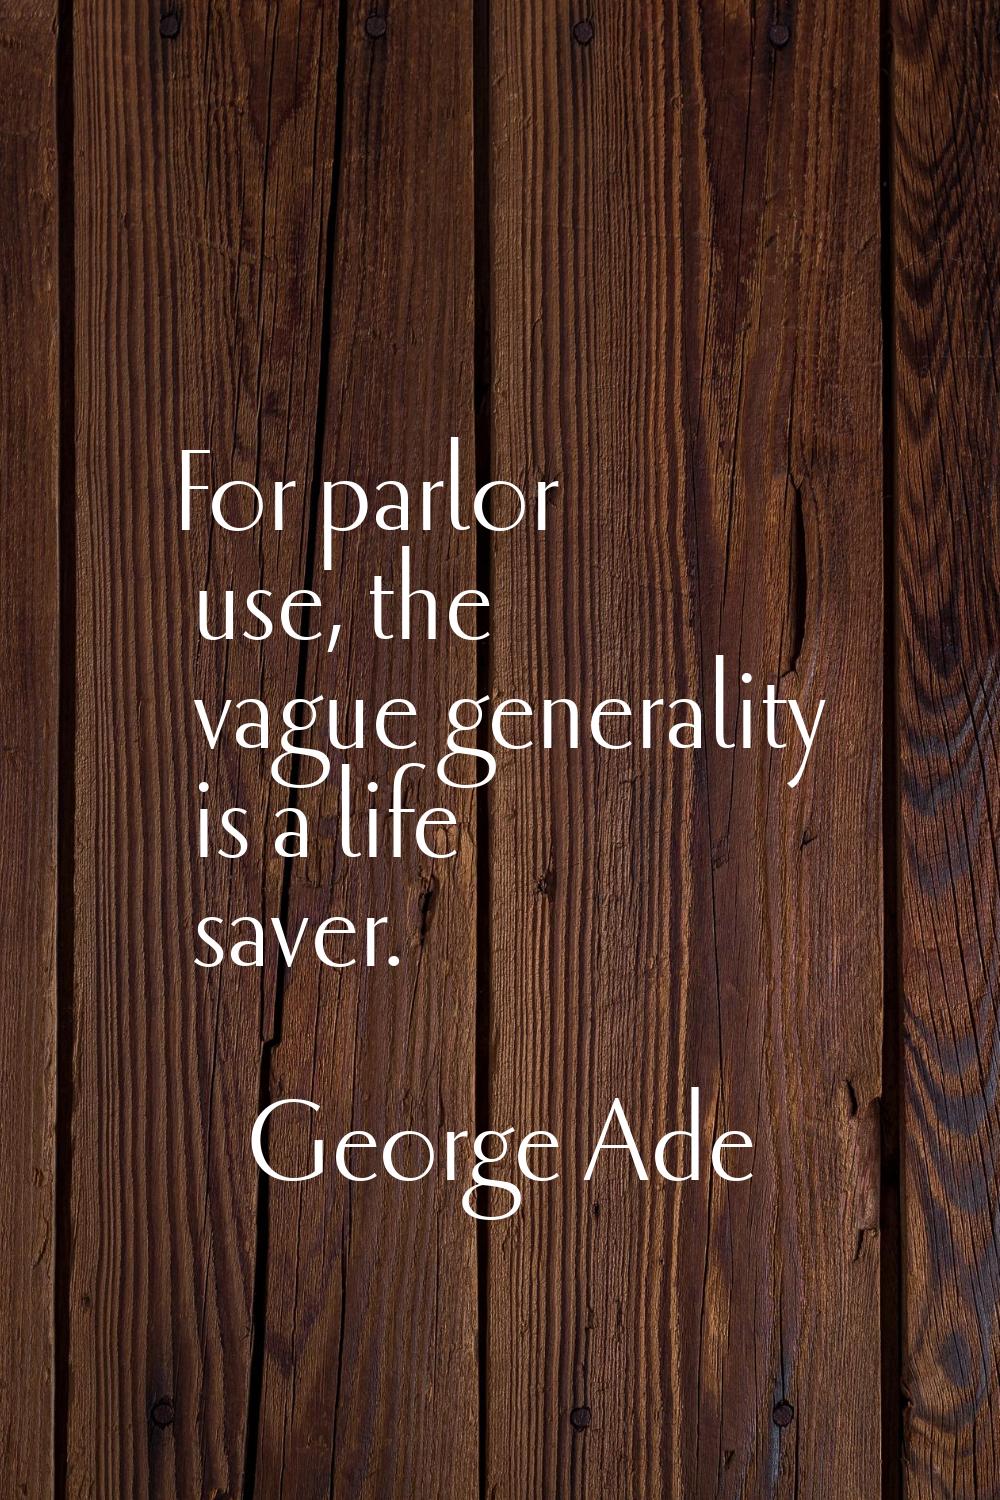 For parlor use, the vague generality is a life saver.